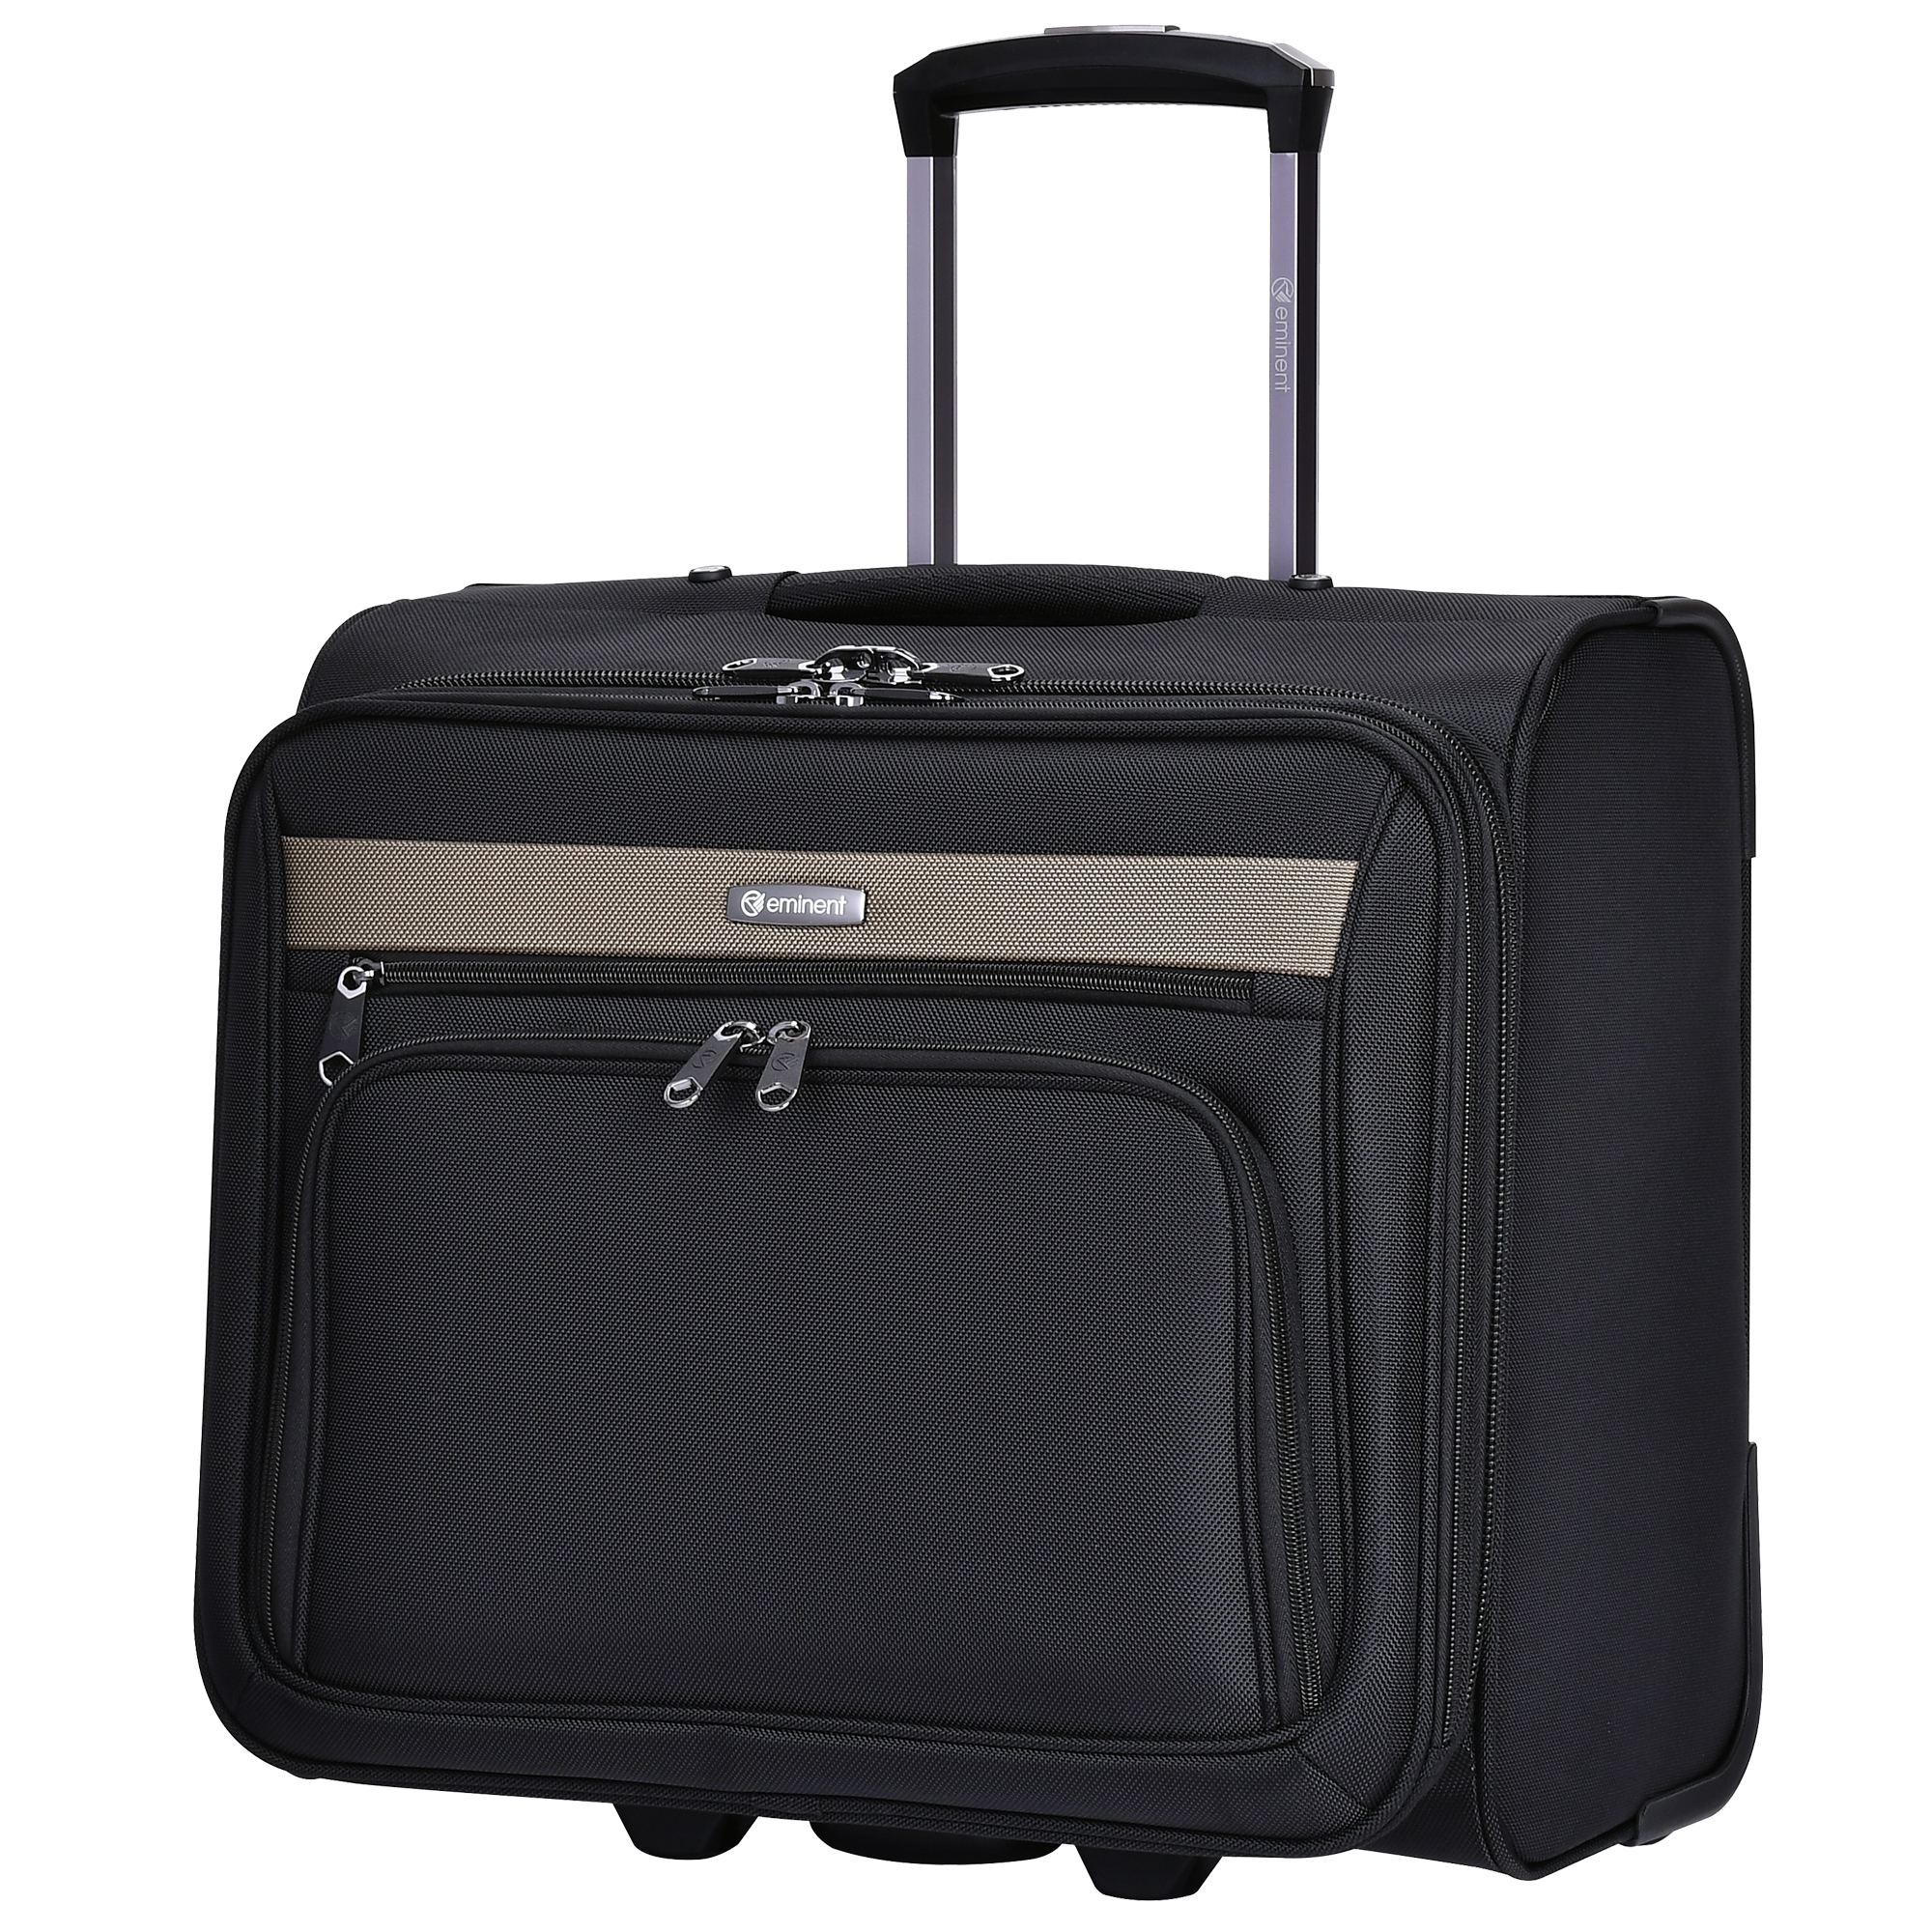 Eminent Water Repellant Multi Compartment Unisex Pilot case Trolley for Business Travel and Office, V135-17